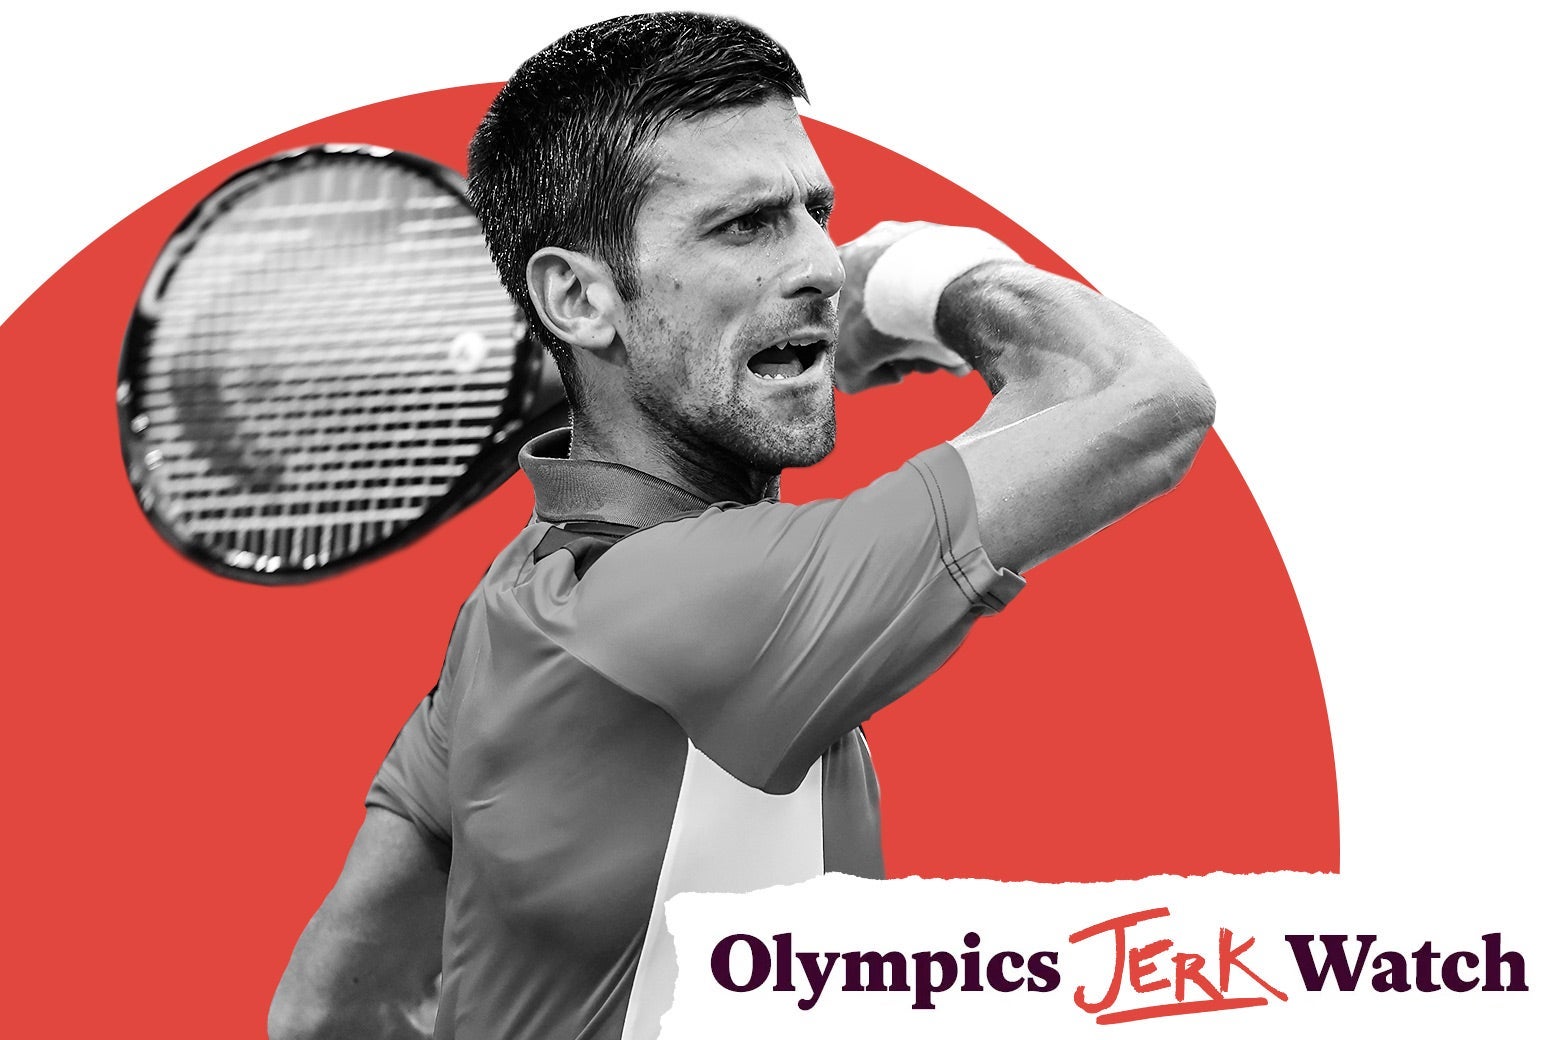 Novak Djokovic's follow-through after hitting a forehand, with the Olympics Jerk Watch label in the bottom right corner.